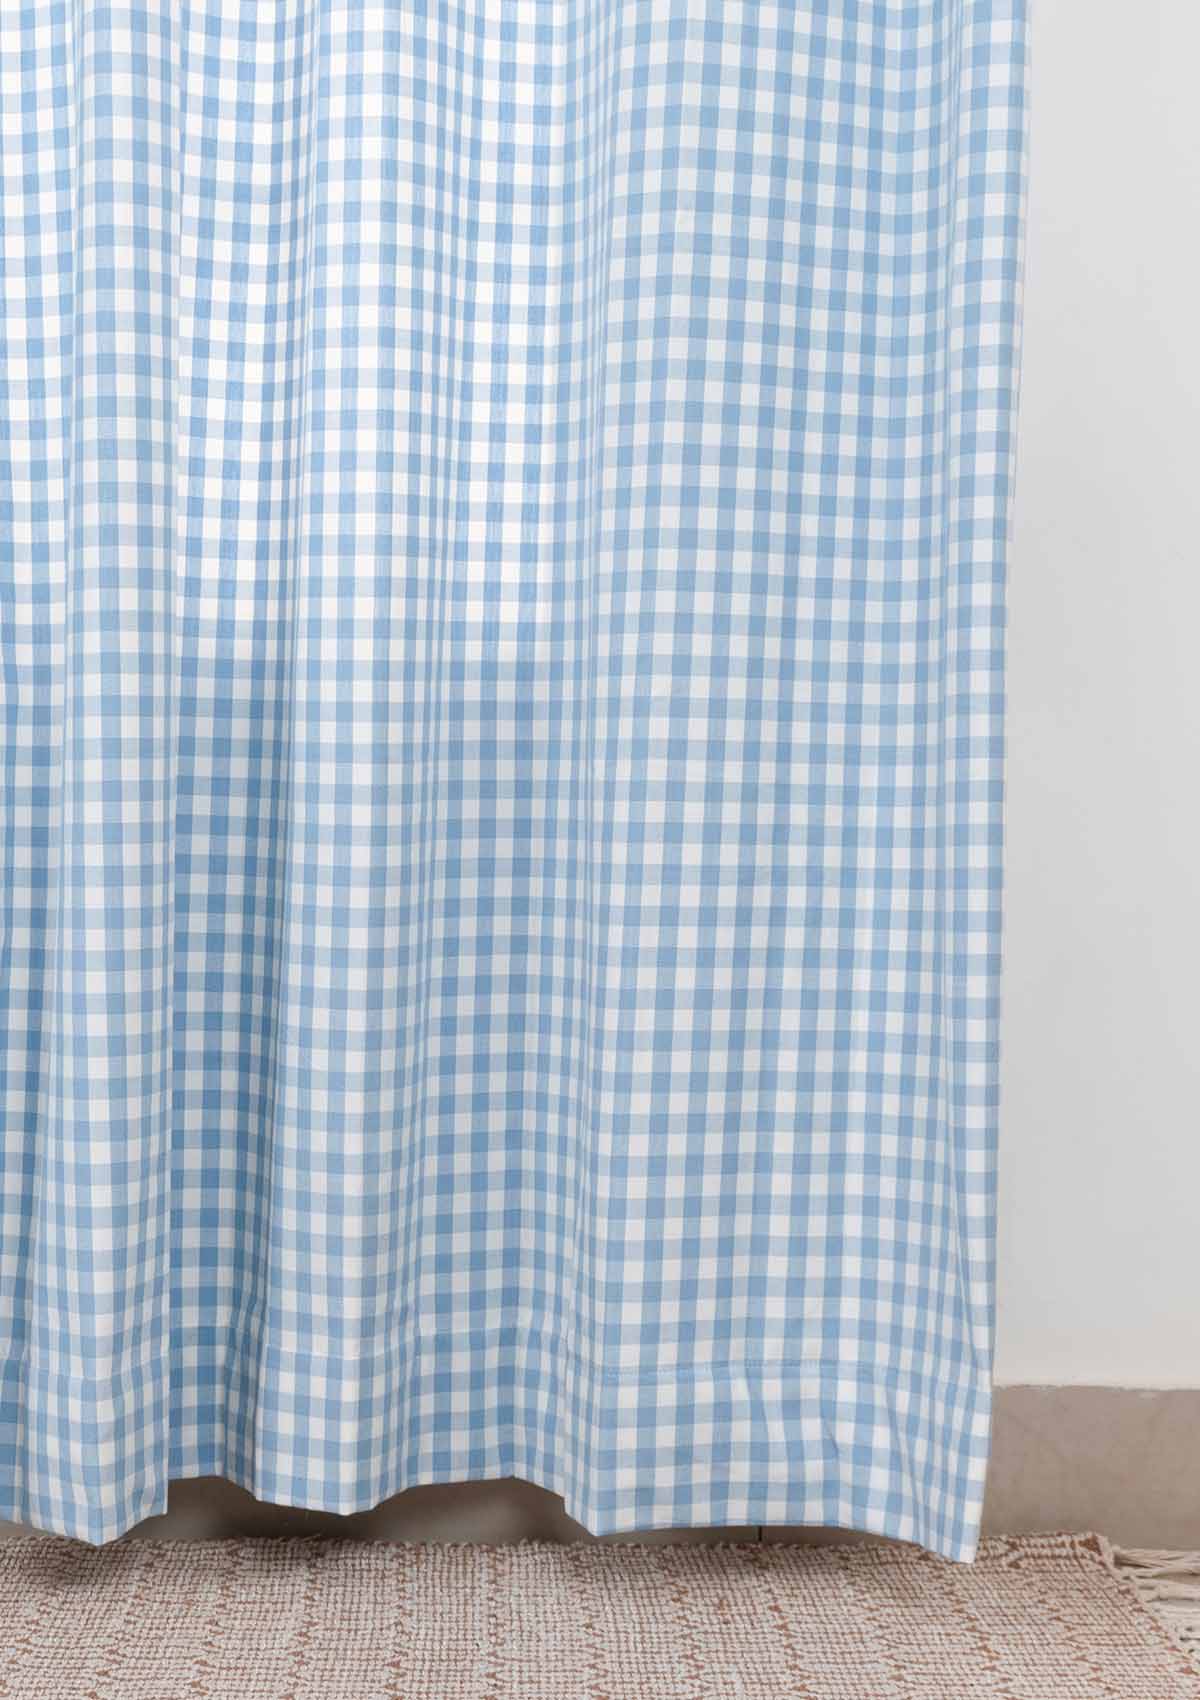 Gingham Woven 100% cotton geometric curtain for living room - Room darkening - Powder Blue - Pack of 1